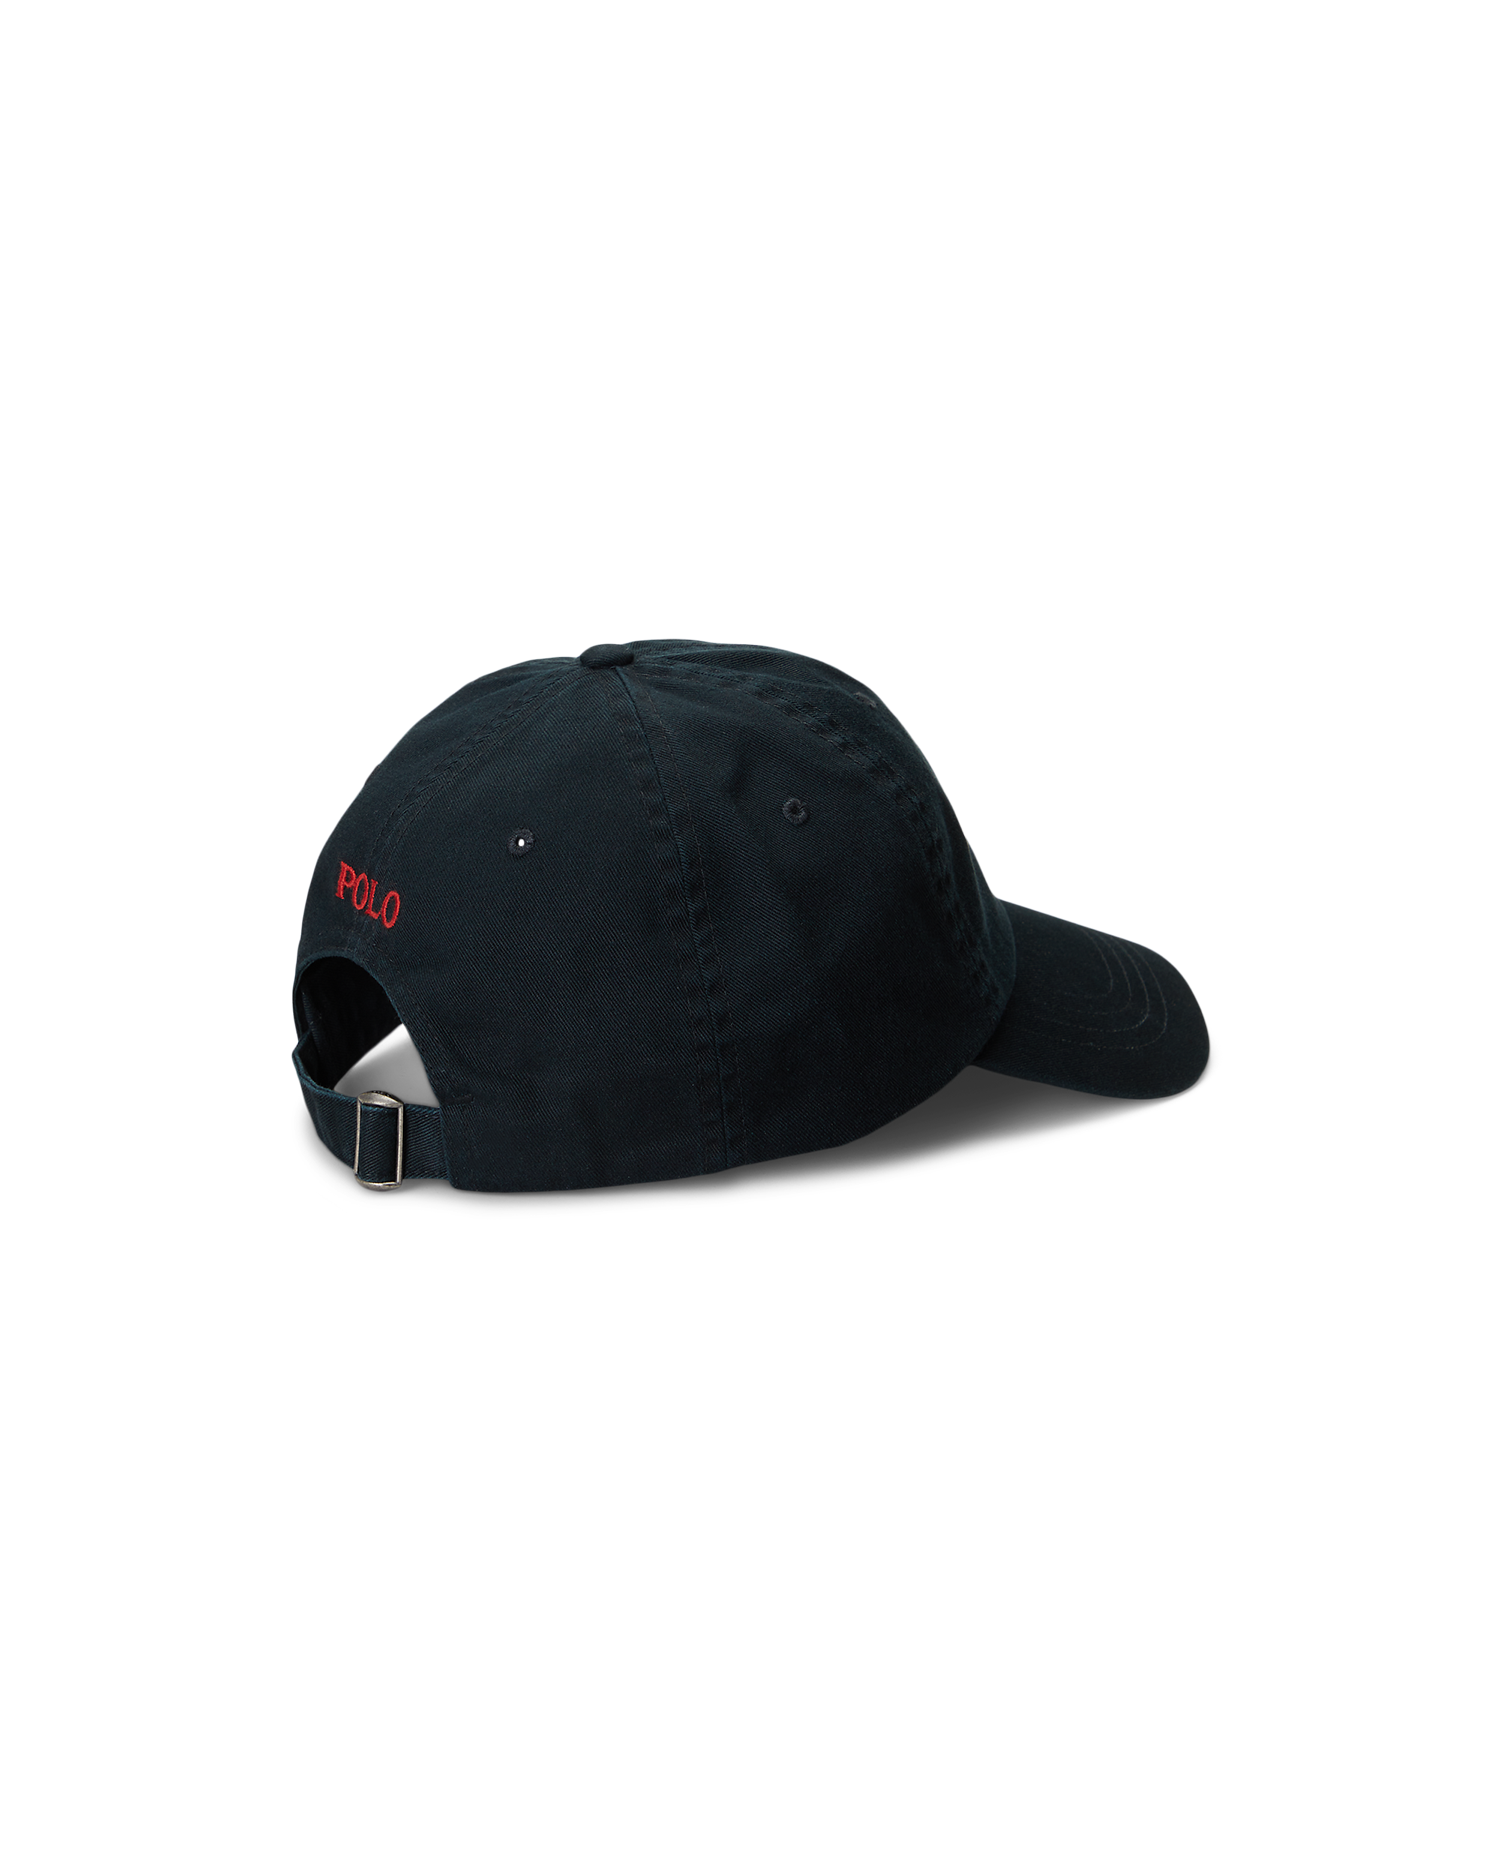 Embroidered Sports Cap - Black / Red